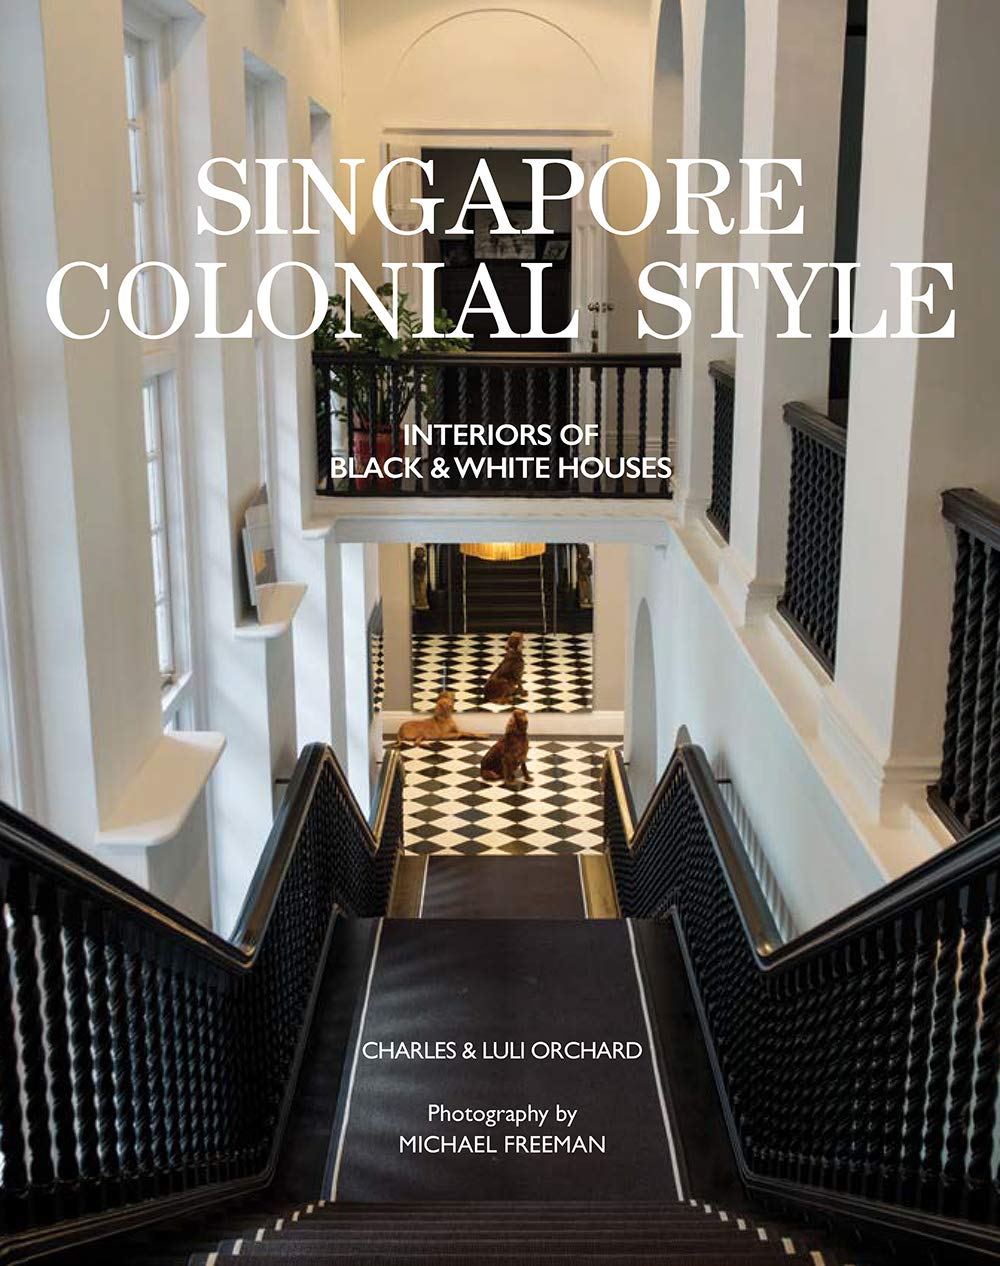 Singapore Colonial Style - Interiors of Black and White